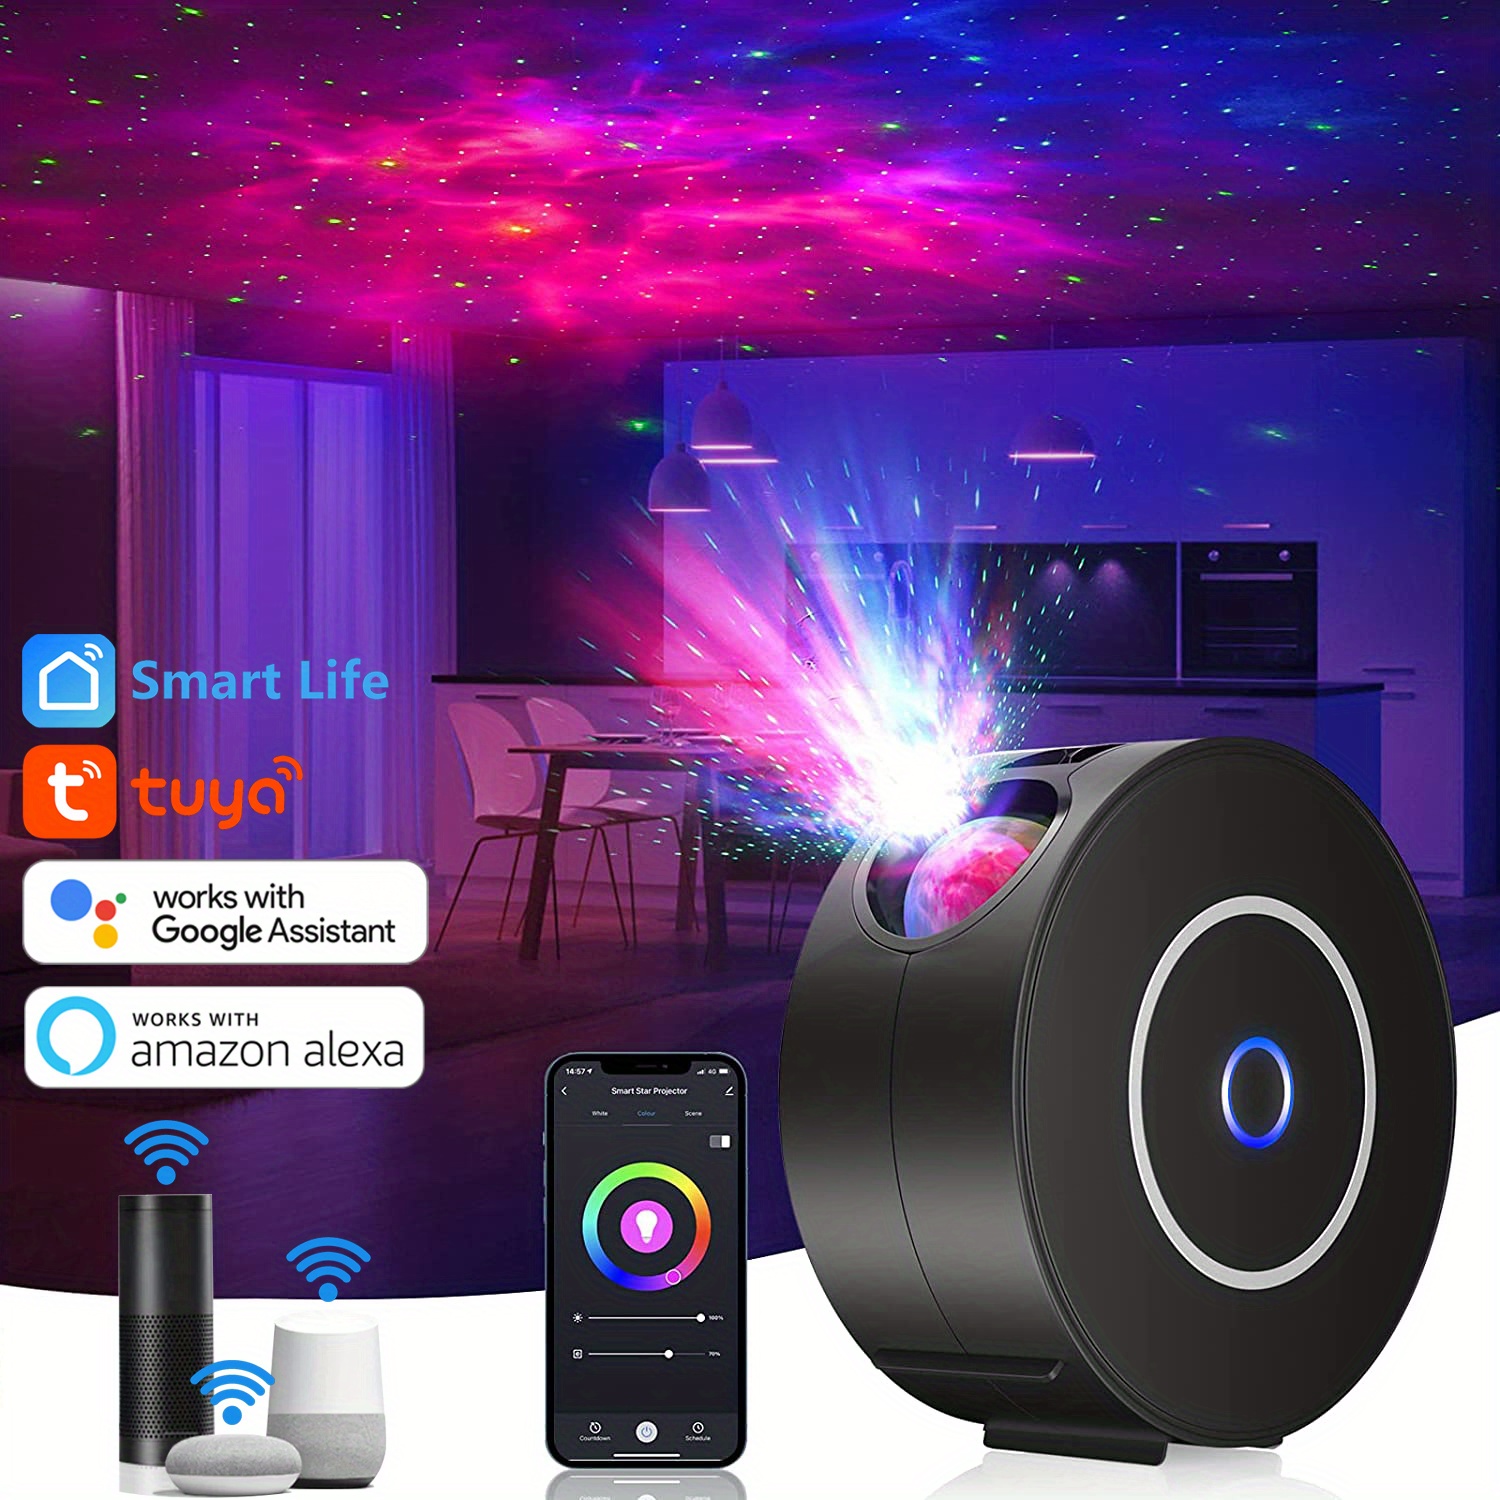 Galaxy Projector Star Projector Night Lights for Bedroom with Music Speaker  & Remote Control Work with Smart App & Alexa,Galaxy Light Projector for